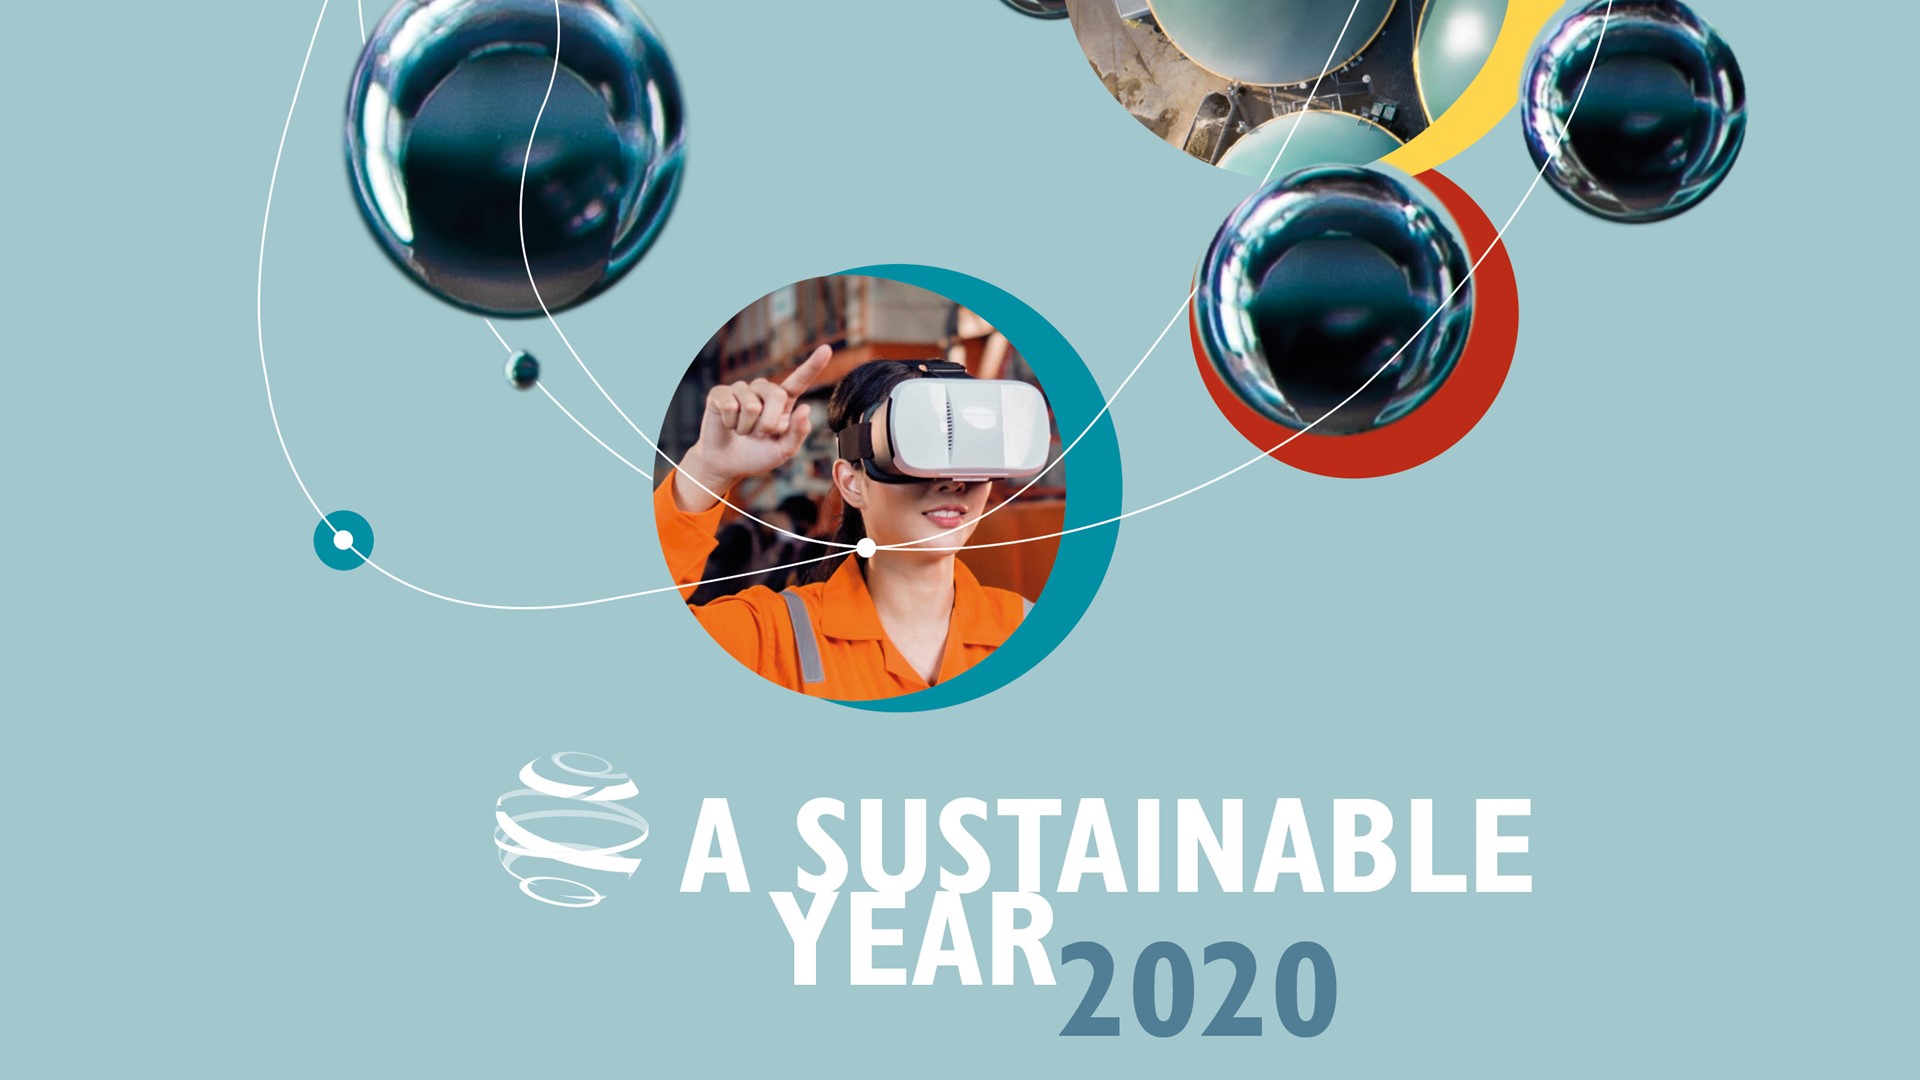 CNH Industrial's A Sustainable Year 2020 publication